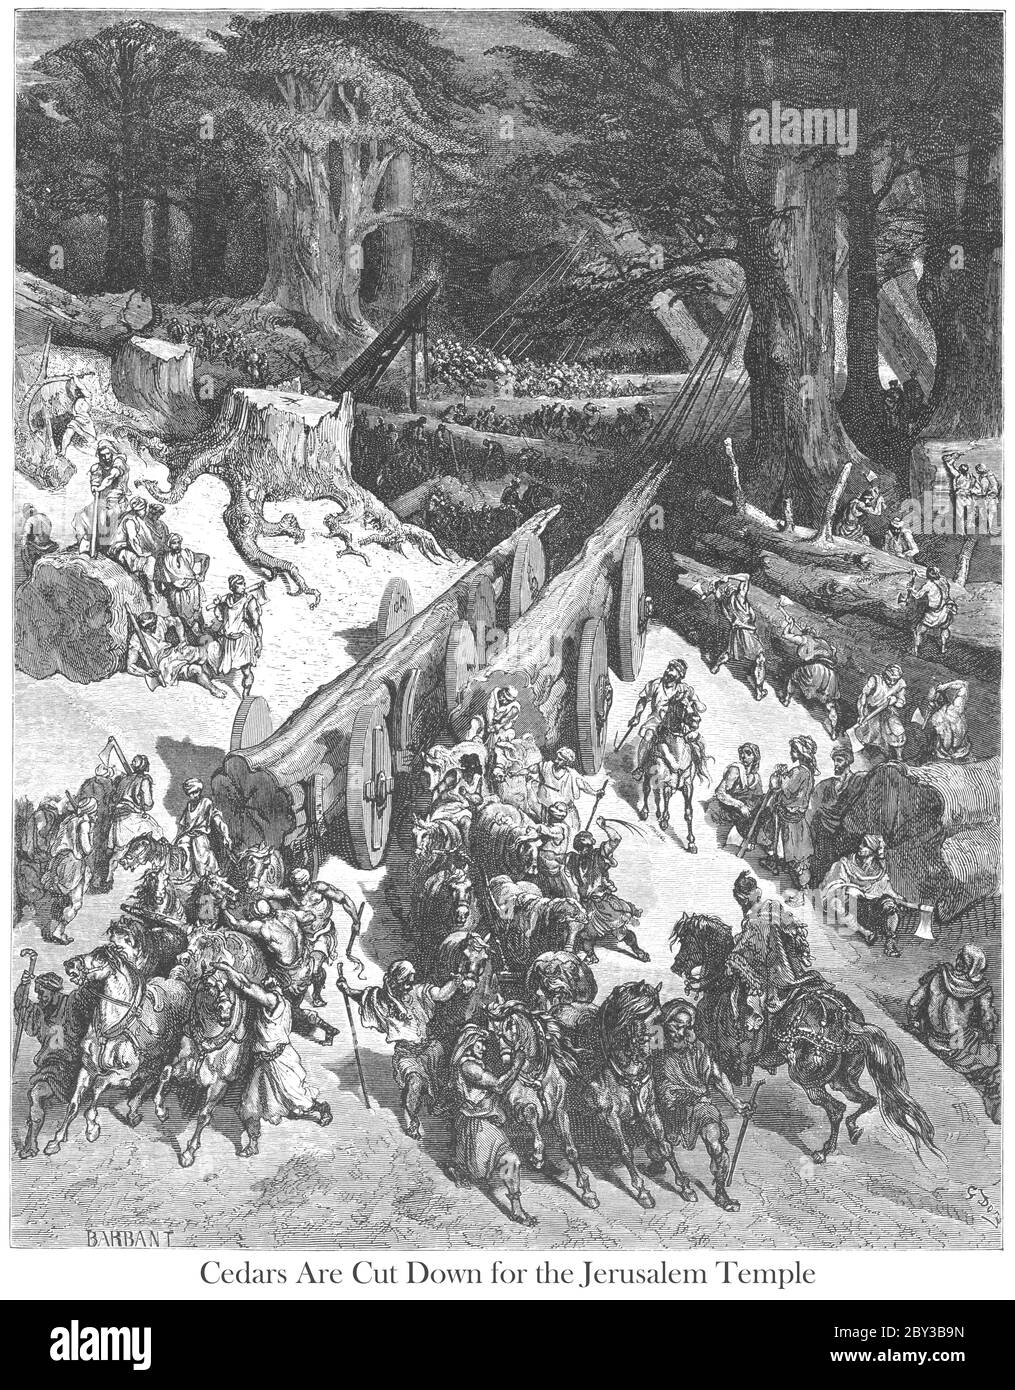 Cutting Down Cedars [of Lebanon] for the Construction of the Temple [in Jerusalem] 1 Kings 5:5-6 From the book 'Bible Gallery' Illustrated by Gustave Dore with Memoir of Dore and Descriptive Letter-press by Talbot W. Chambers D.D. Published by Cassell & Company Limited in London and simultaneously by Mame in Tours, France in 1866 Stock Photo